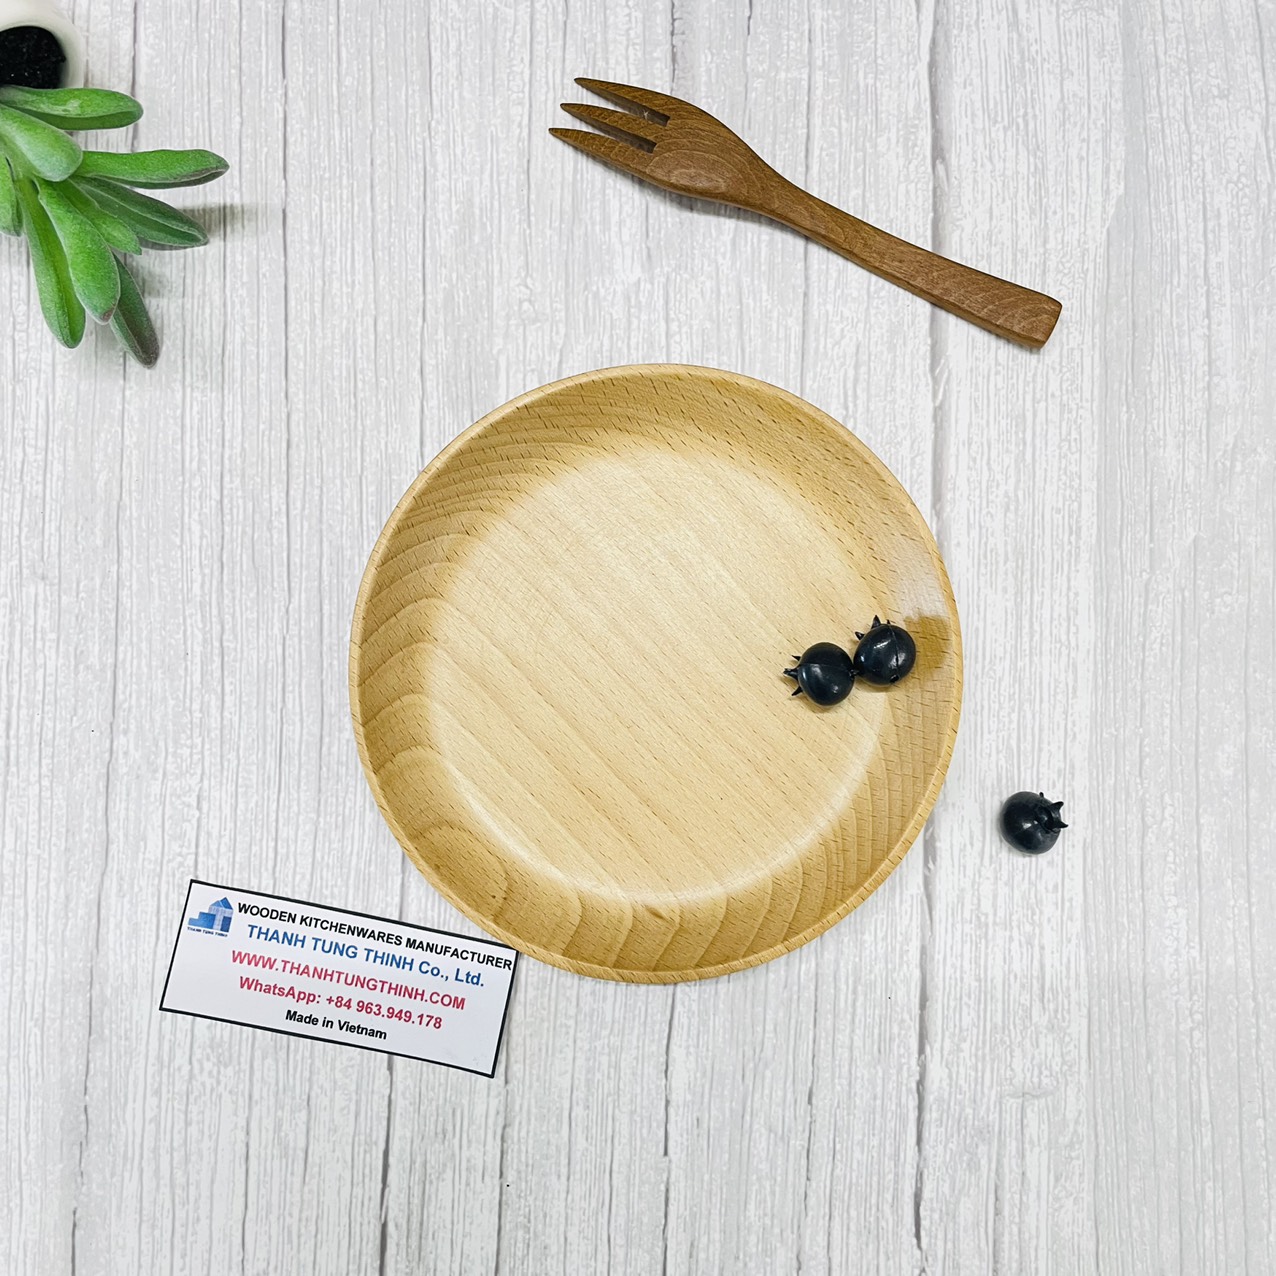 Manufacturer of Basic round wooden tray